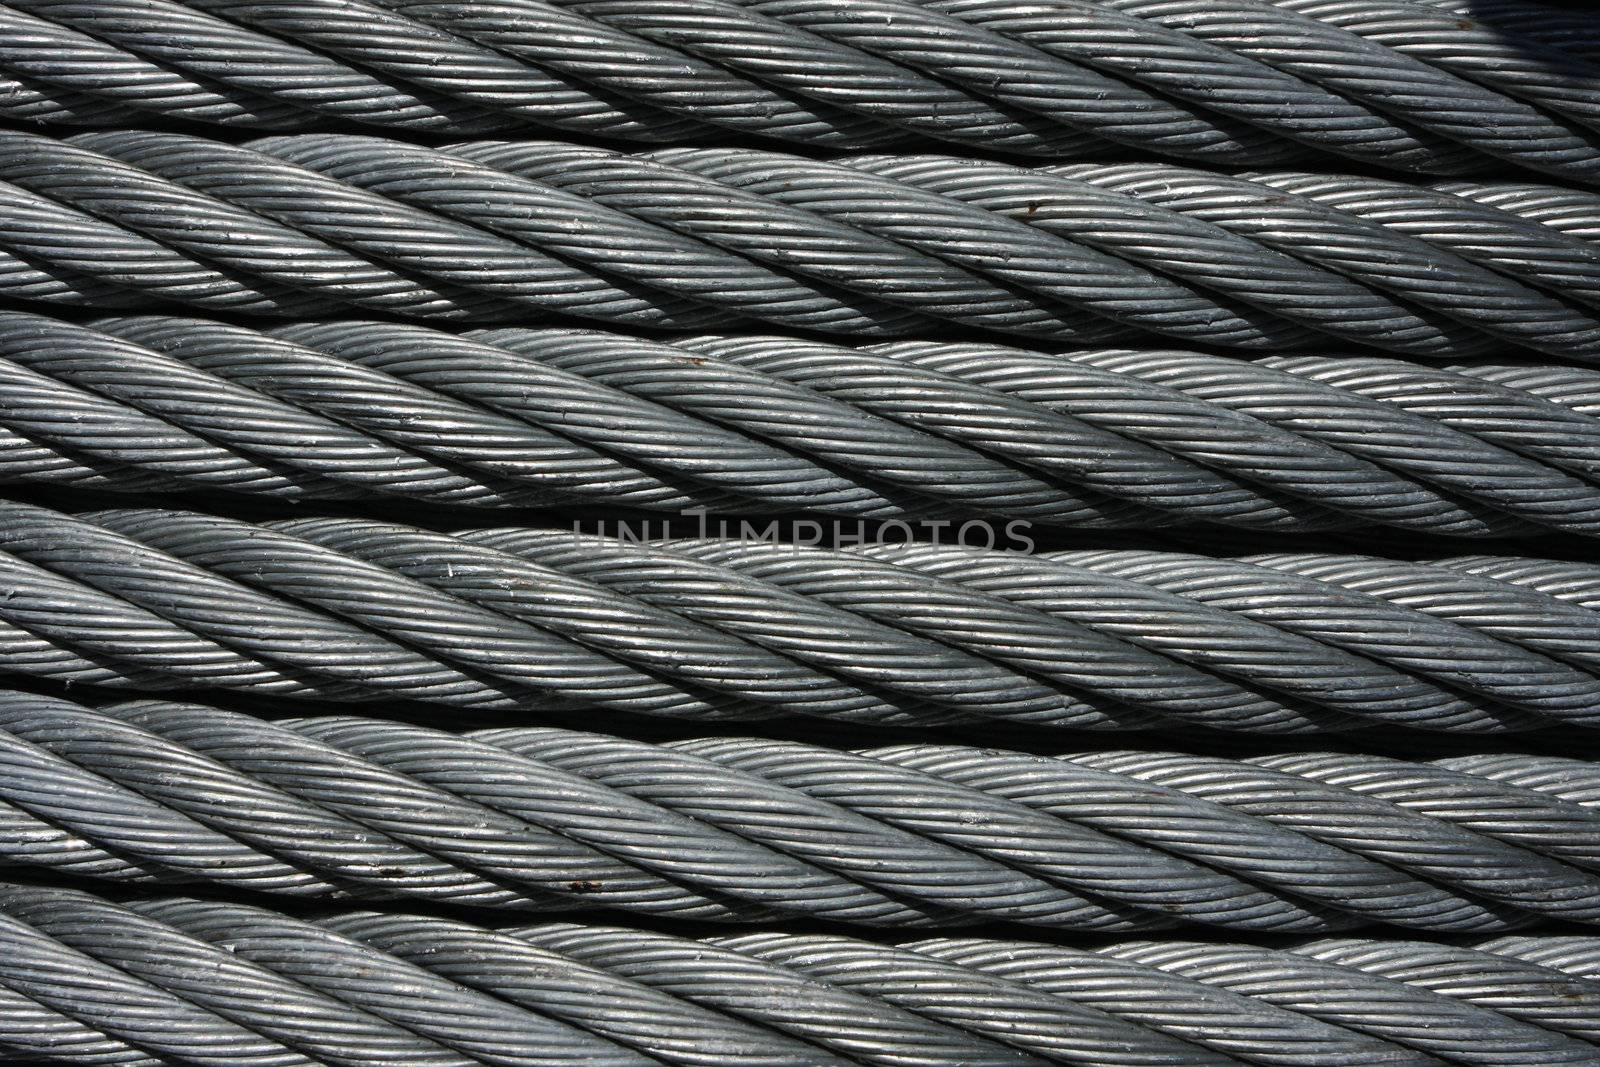 close up of silver metal wire very sharp and great texture, perfect for designs or backgrounds